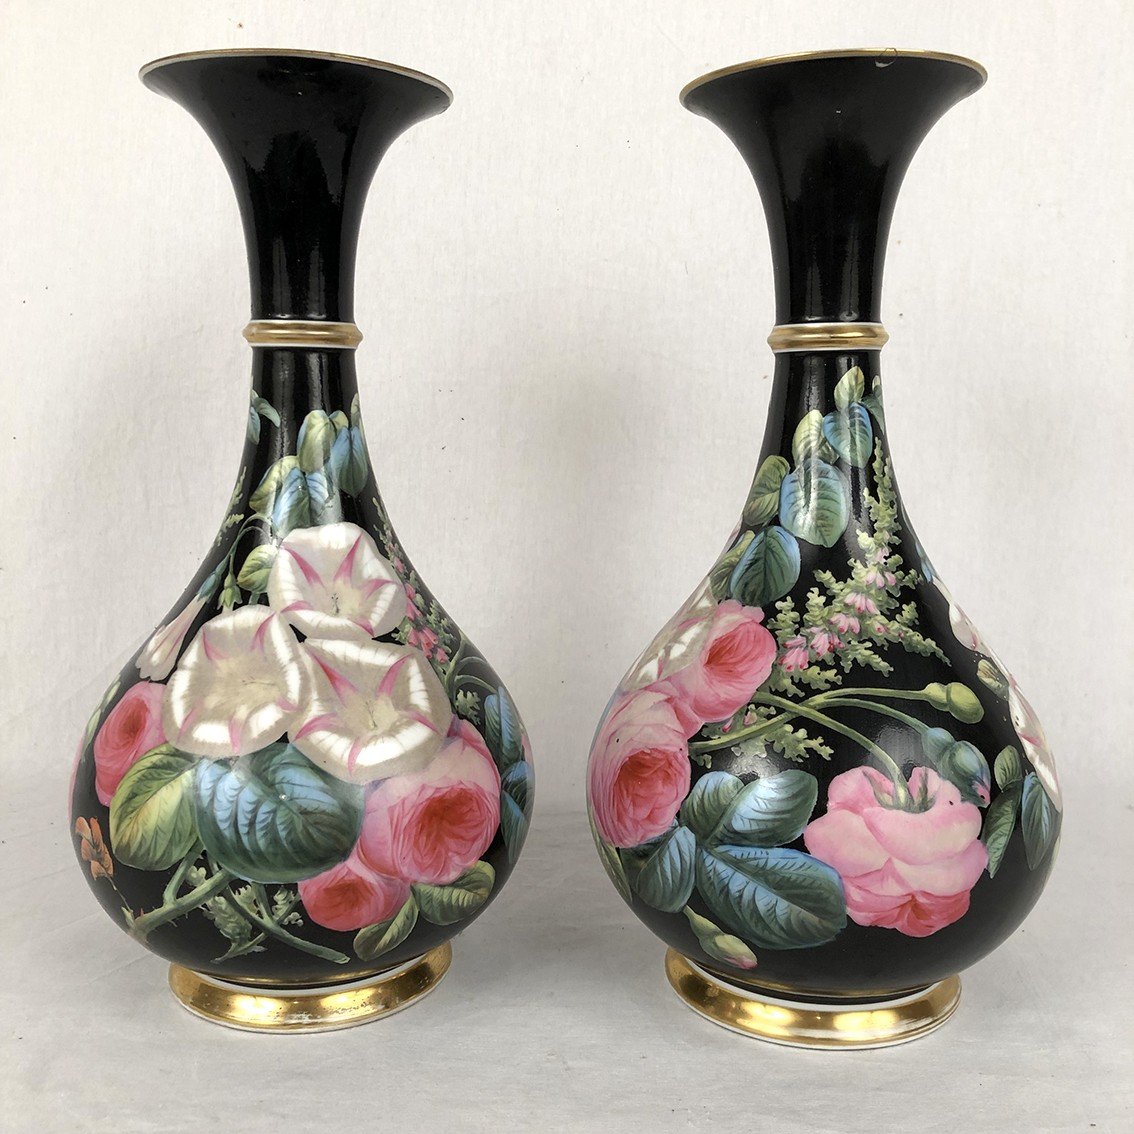 Pair Of Porcelain Baluster Vases Decorated With Flowers On A Black Background, Napoleon III Period-photo-1